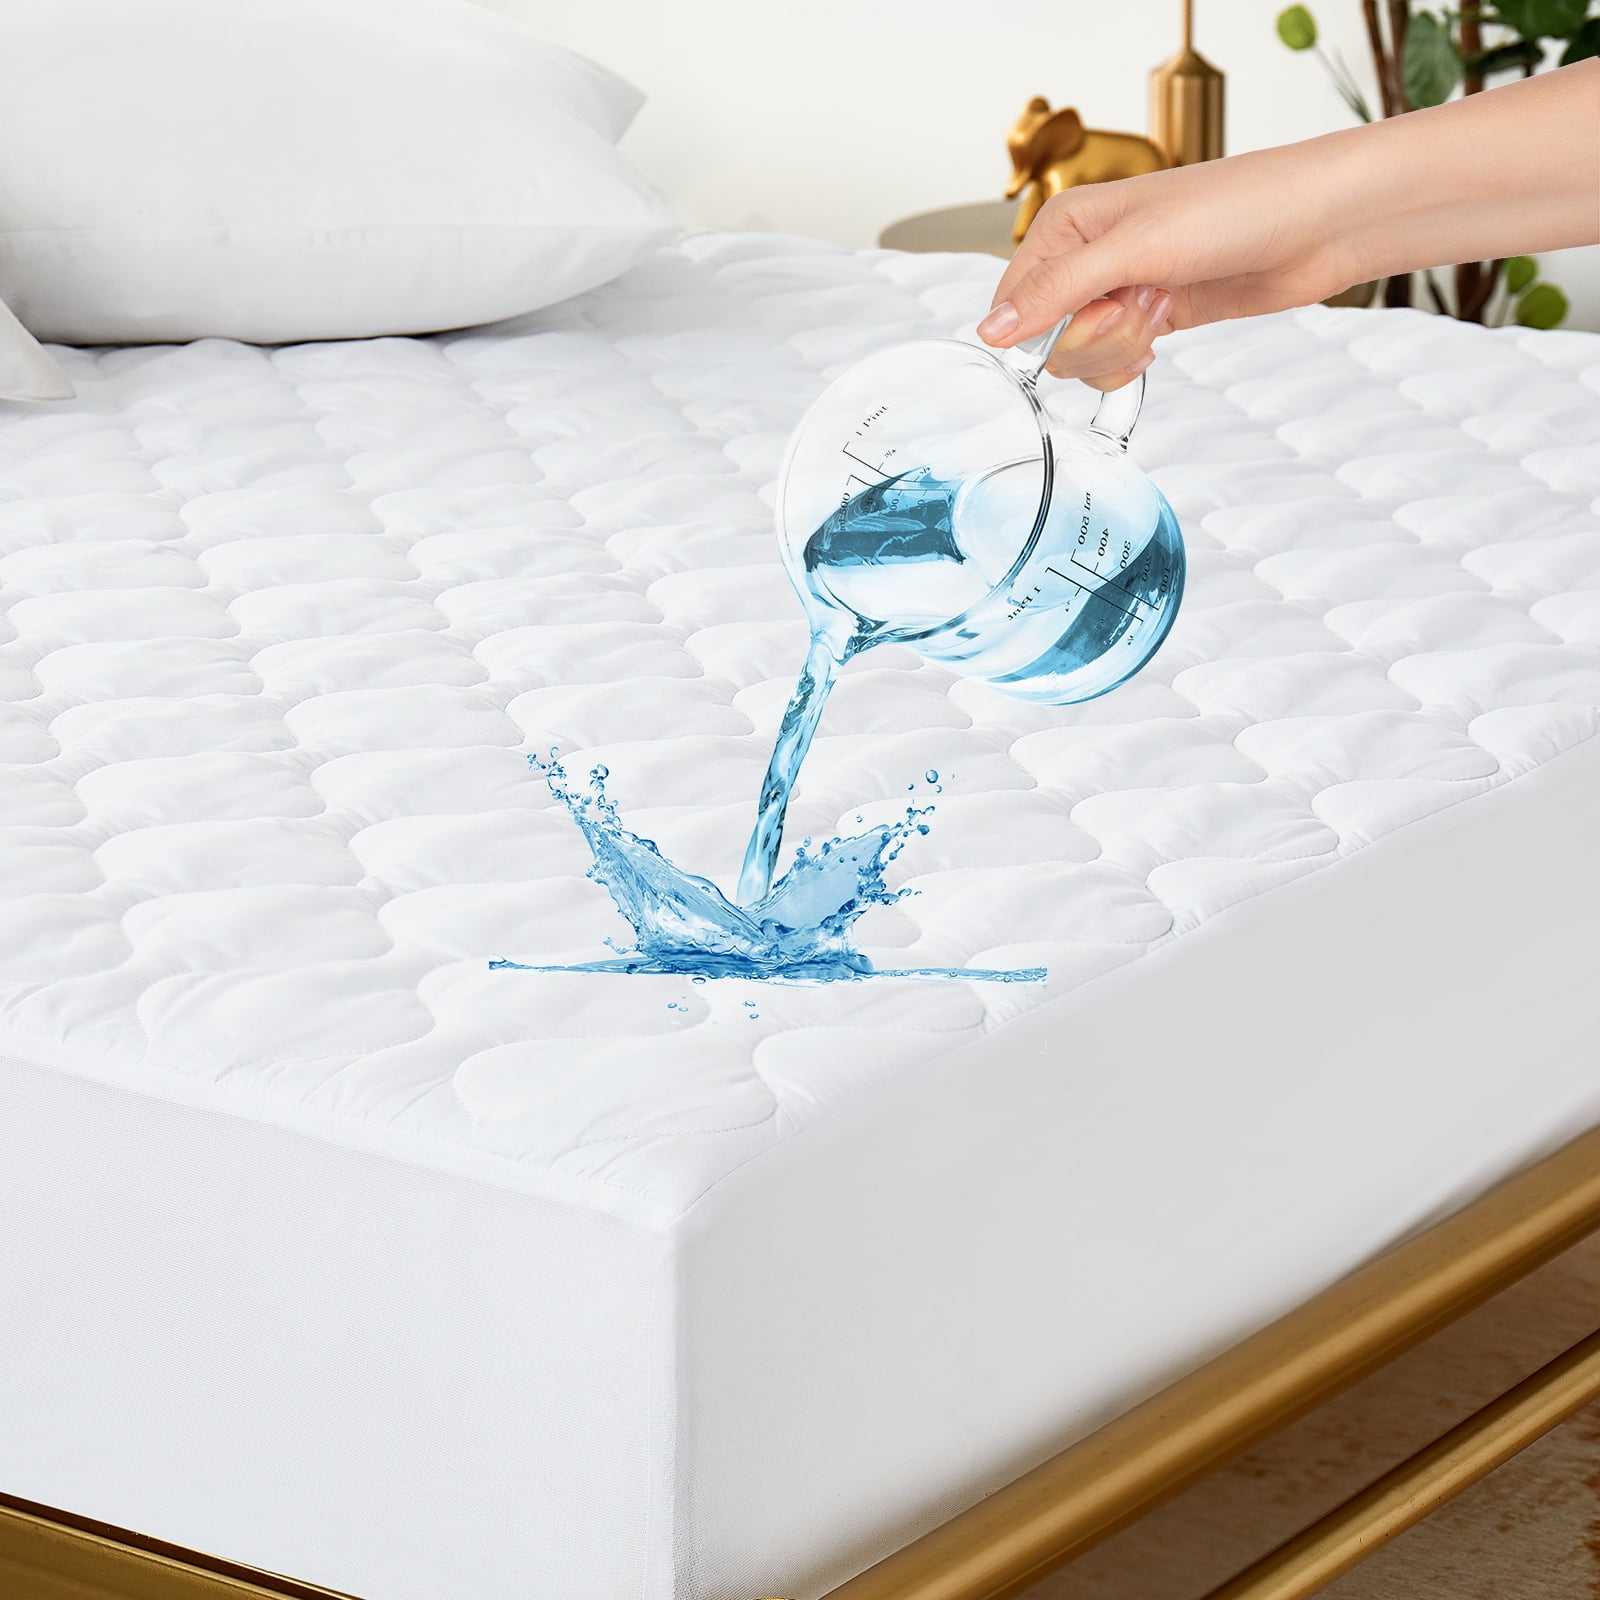 Easy to Clean Soft Breathable Smooth Mattress Cover Full Size 100% Waterproof Mattress Pad Fits Up to 21 Inches Deep Pocket Skirt 3D Air Fiber Fabric Mattress Protector 